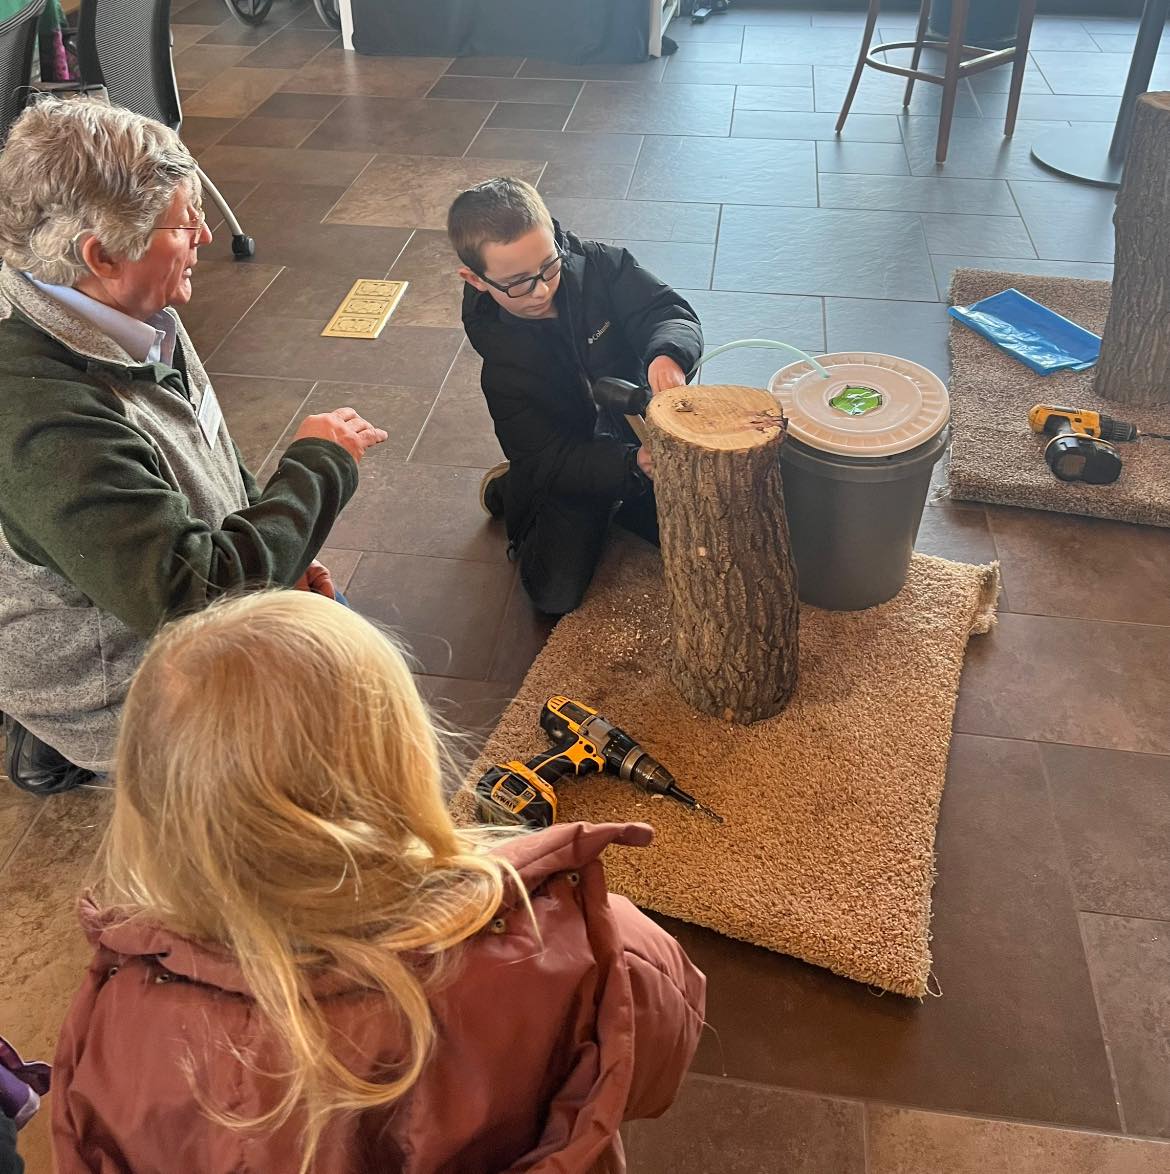 A boy drills a tap into a tree stump during a Maple Syrup Workshop at McCrory Gardens